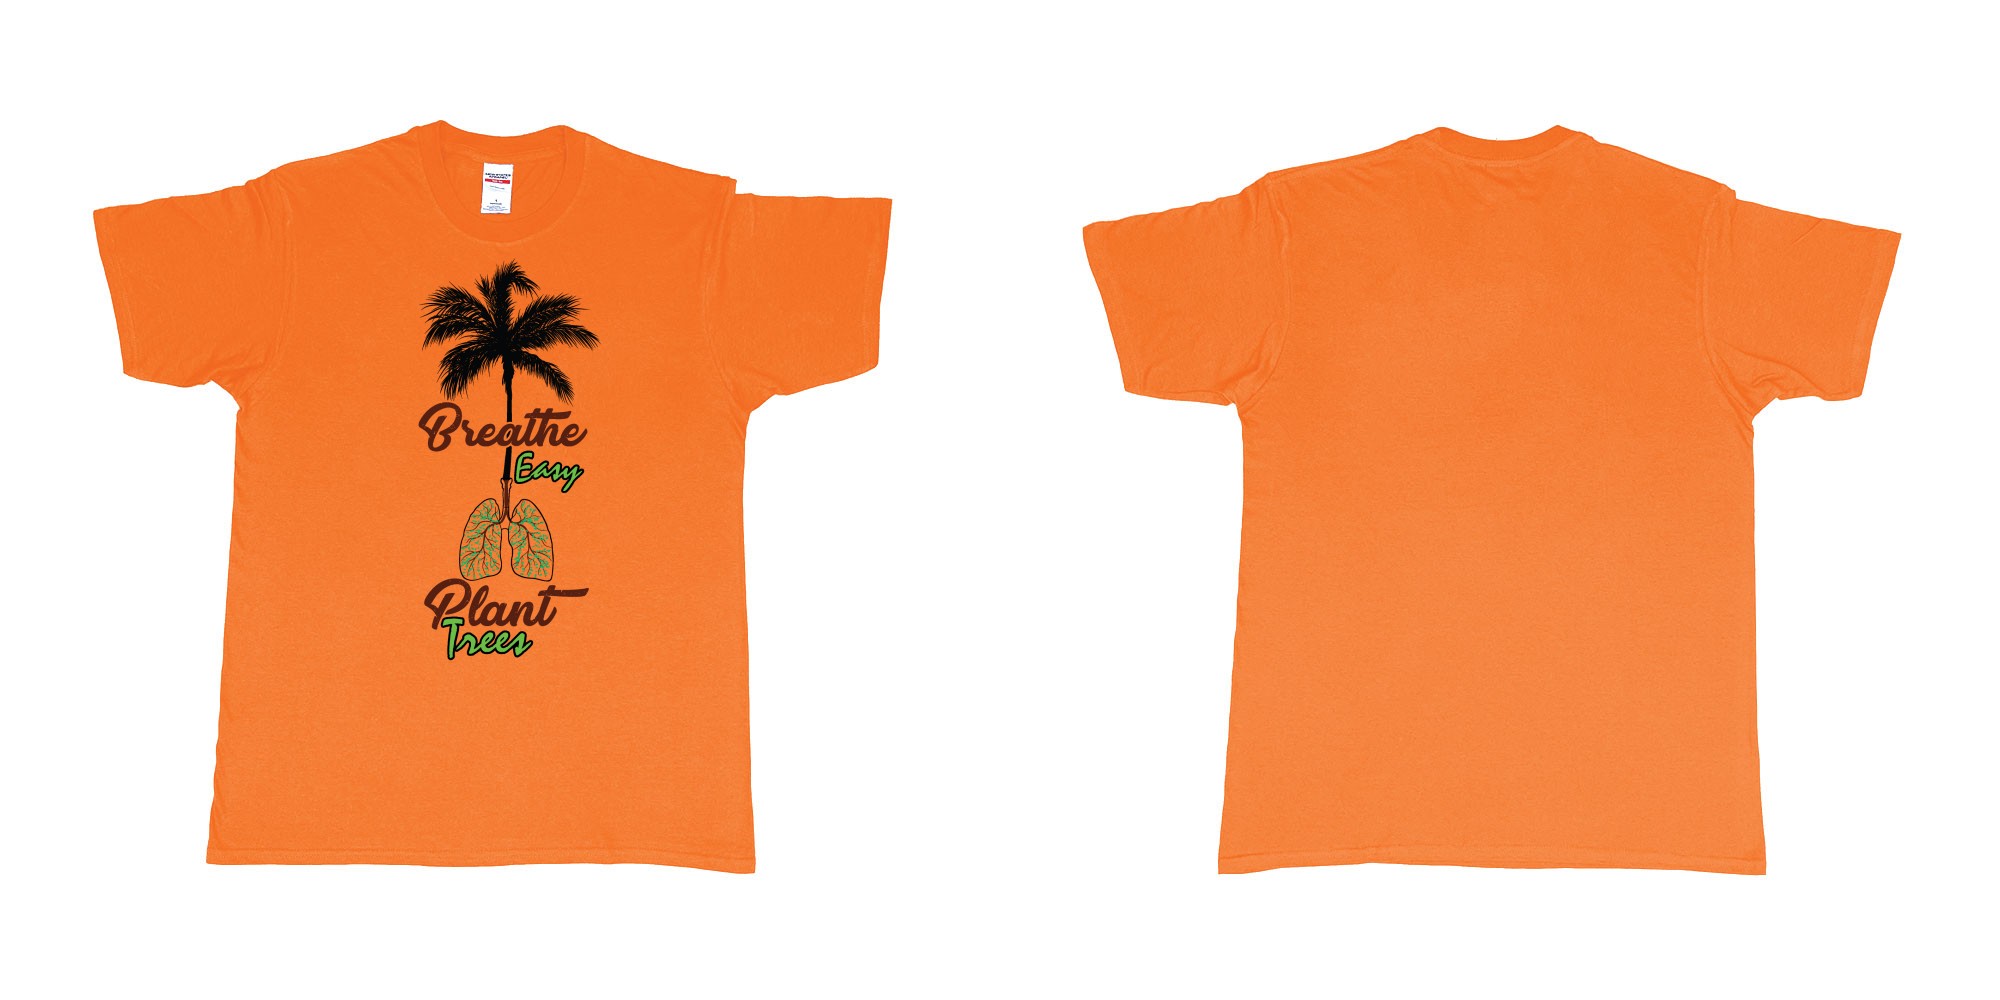 Custom tshirt design breathe easy and plant a tree for better air for everyone in fabric color orange choice your own text made in Bali by The Pirate Way